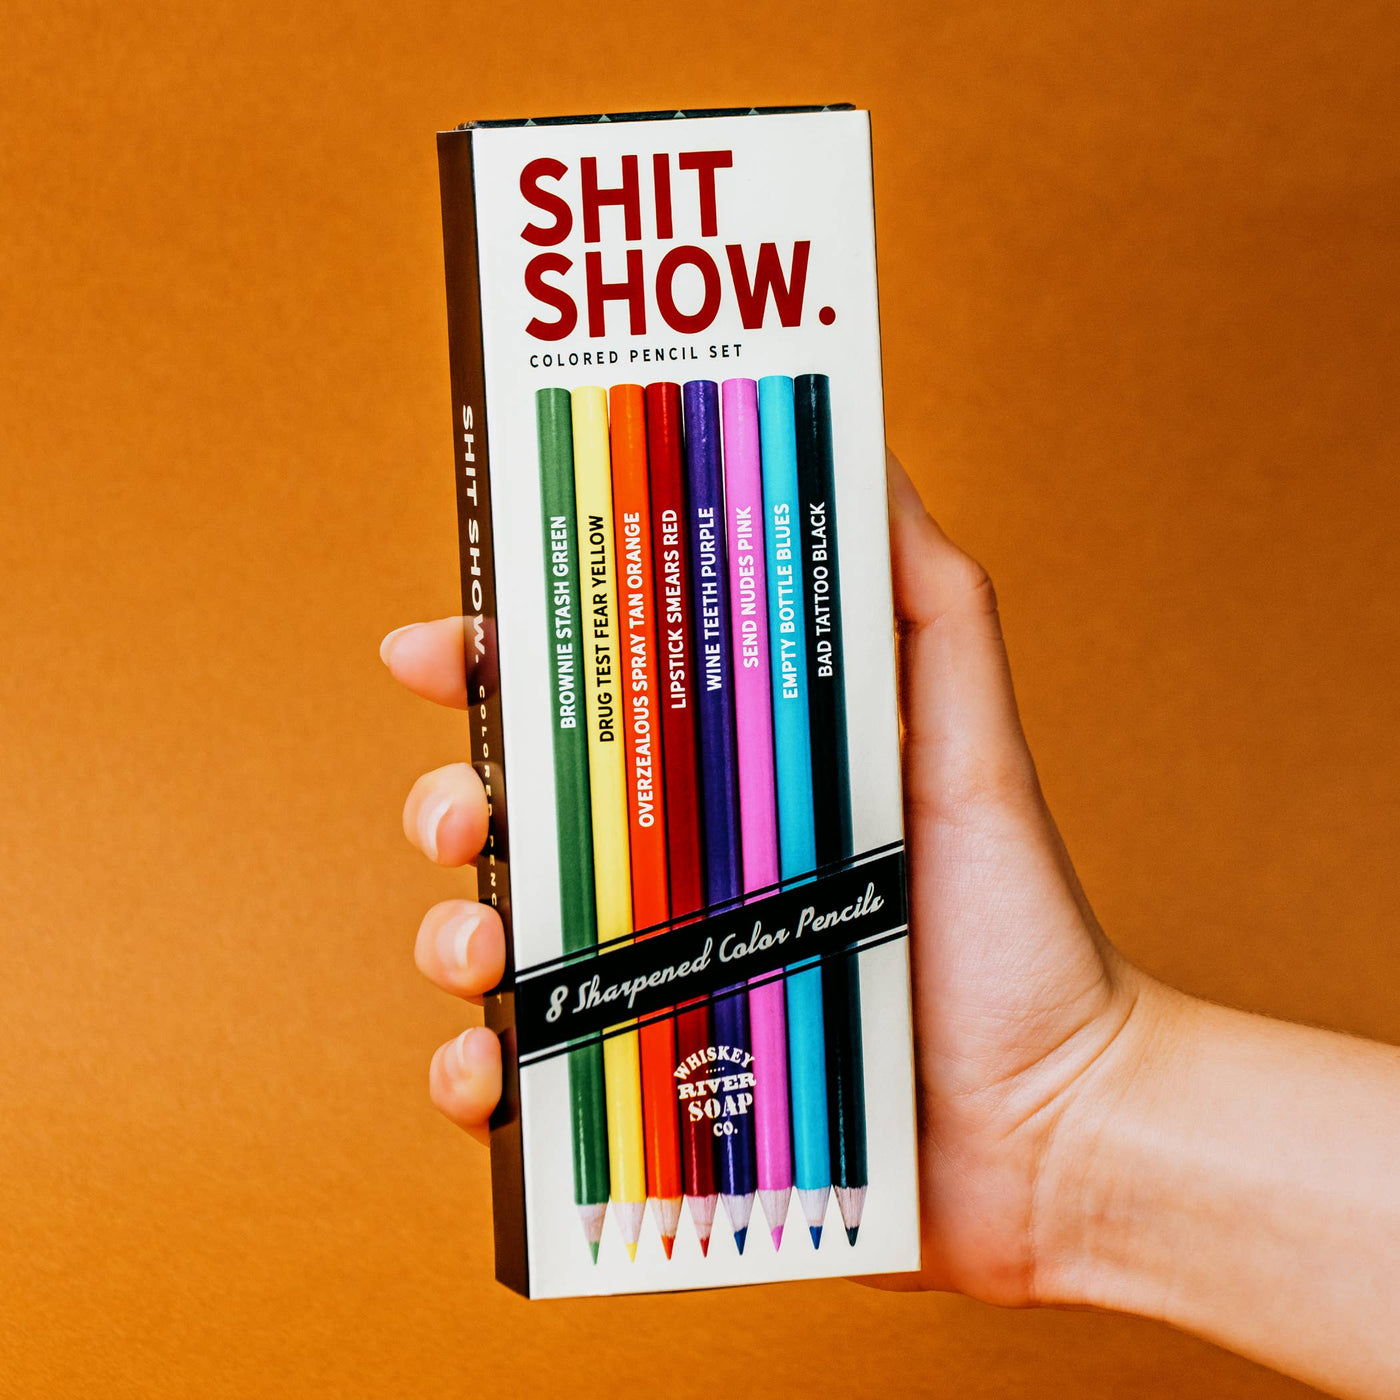 Shit Show Colored Pencils | Funny Pencils | Gift